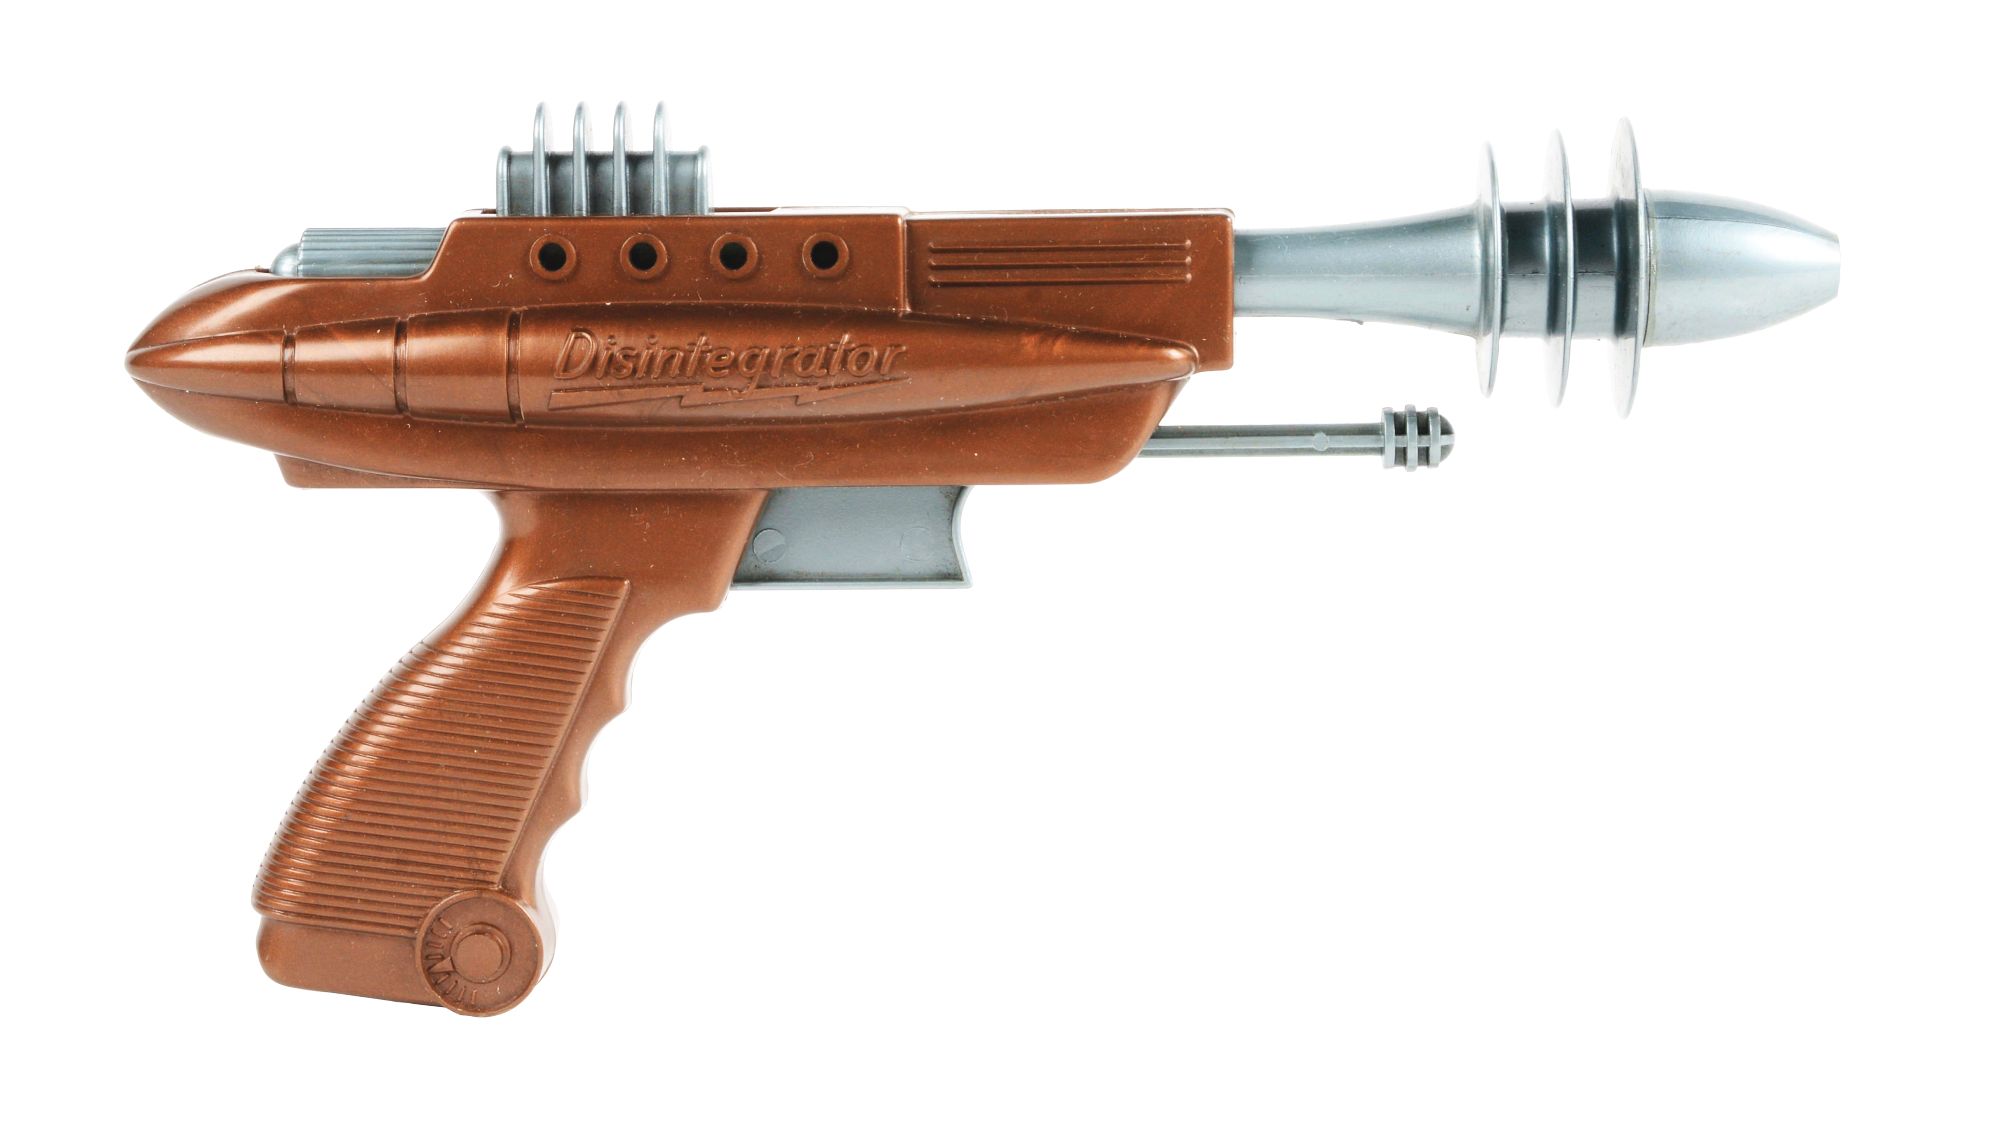 Circa-1953 Pyro Plastics ‘Pyrotomic Disintegrator’ space pistol, 9½ inches long, with metallic copper finish. One of the rarest and most desirable of all vintage ray-guns. Estimate $2,000-$3,000